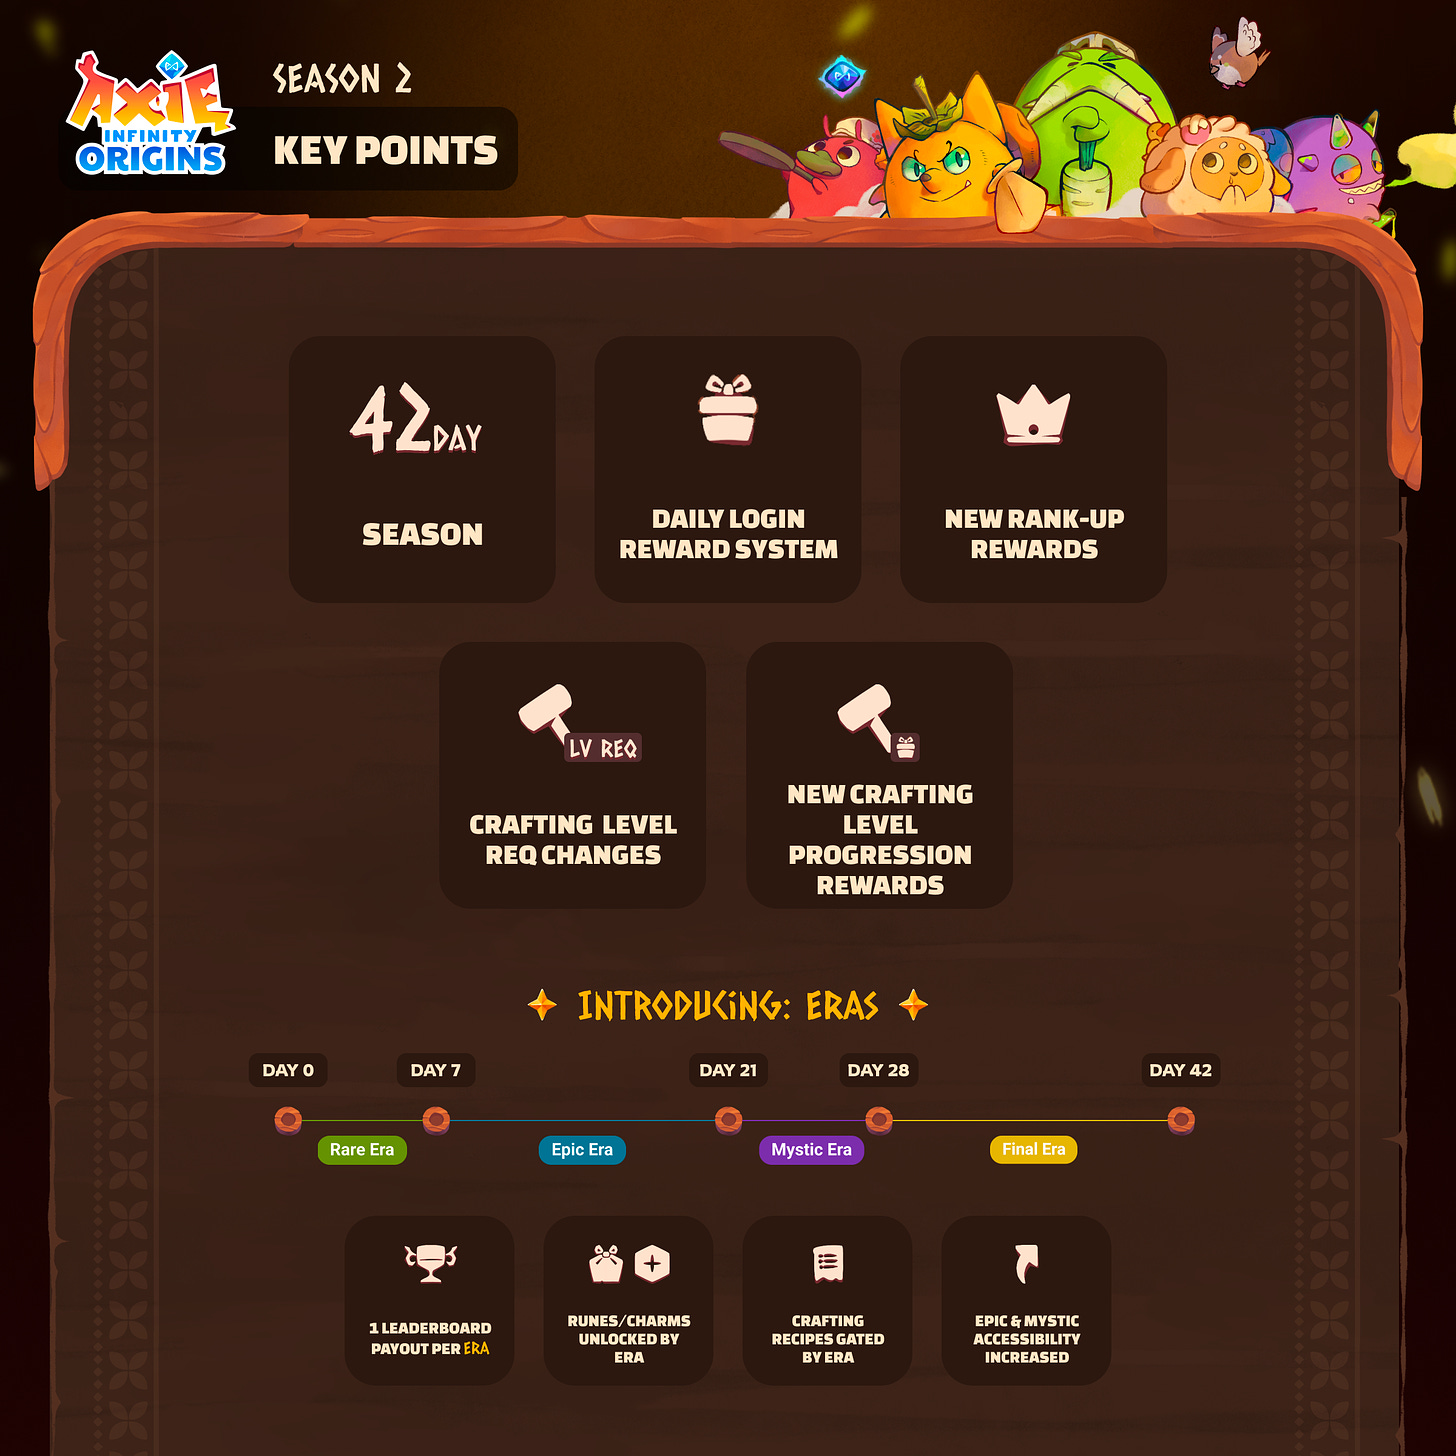 https%3A%2F%2Fsubstack post media.s3.amazonaws.com%2Fpublic%2Fimages%2F800f374a 65d1 4605 bc7f Axie Infinity, the P2E game that revolutionized the blockchain gaming industry, announced that Axie Infinity: Origins Season 2 is ready to be launched and upon us!